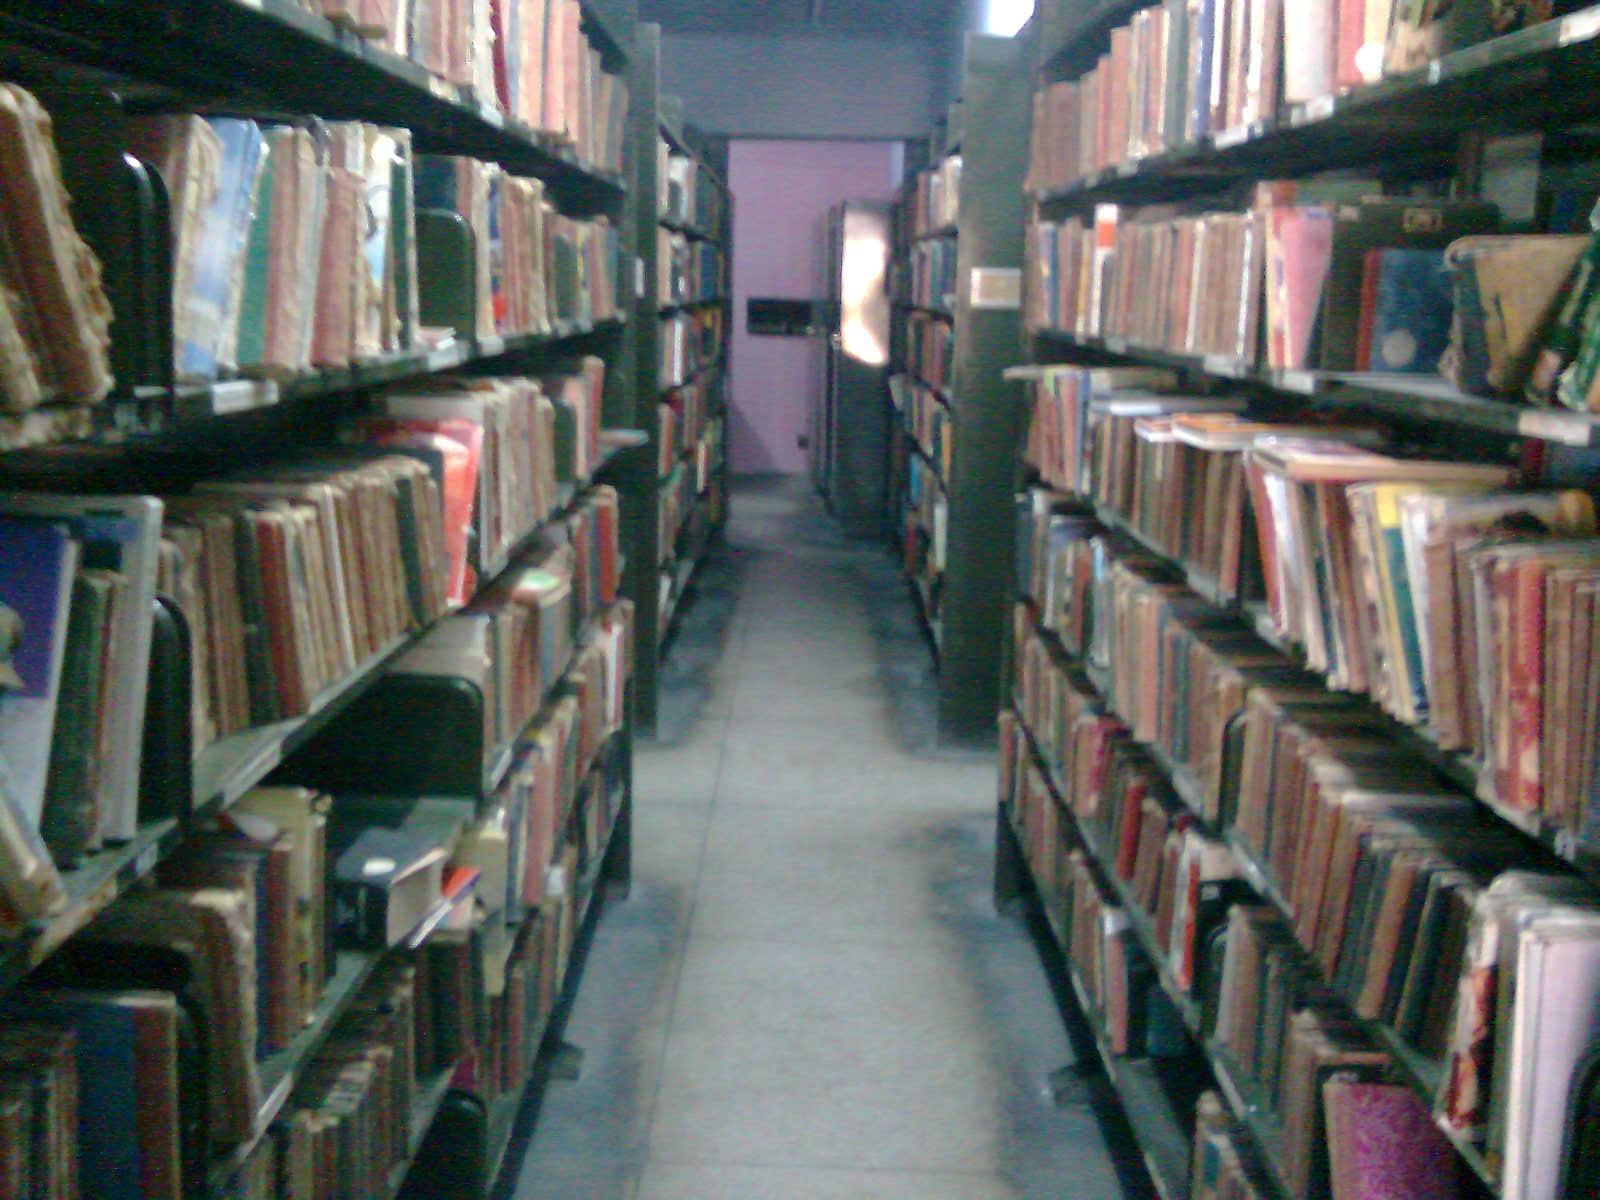 Stack Room, District Library, Bhiwani